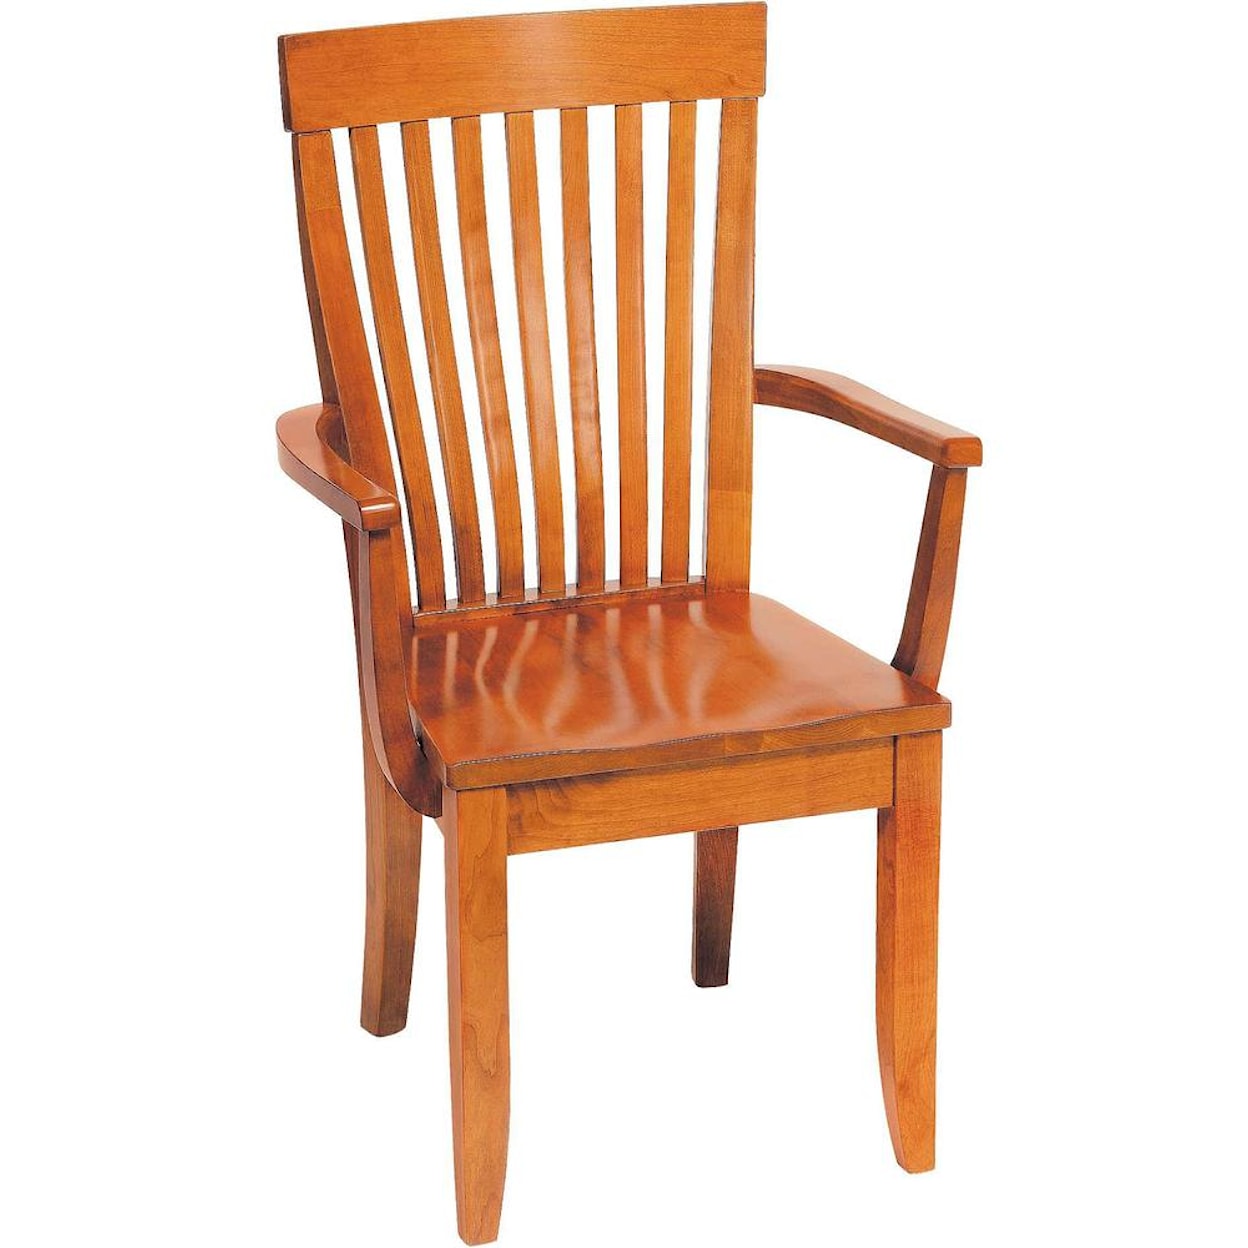 Gat Creek Dining Monterey Arm Chair with Wooden Seat